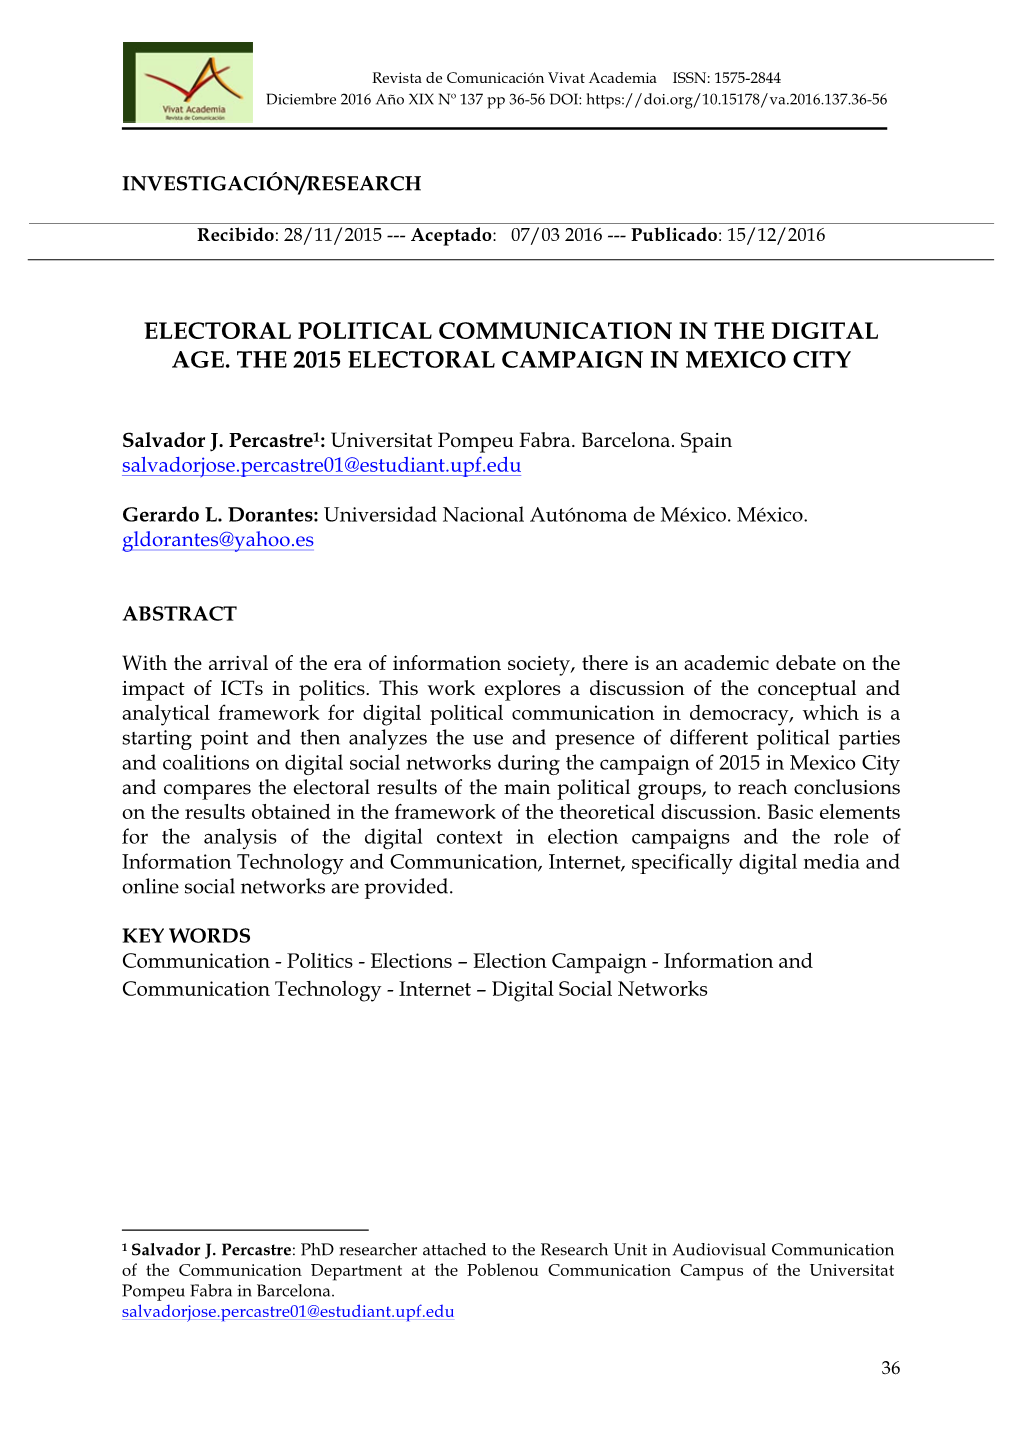 Electoral Political Communication in the Digital Age